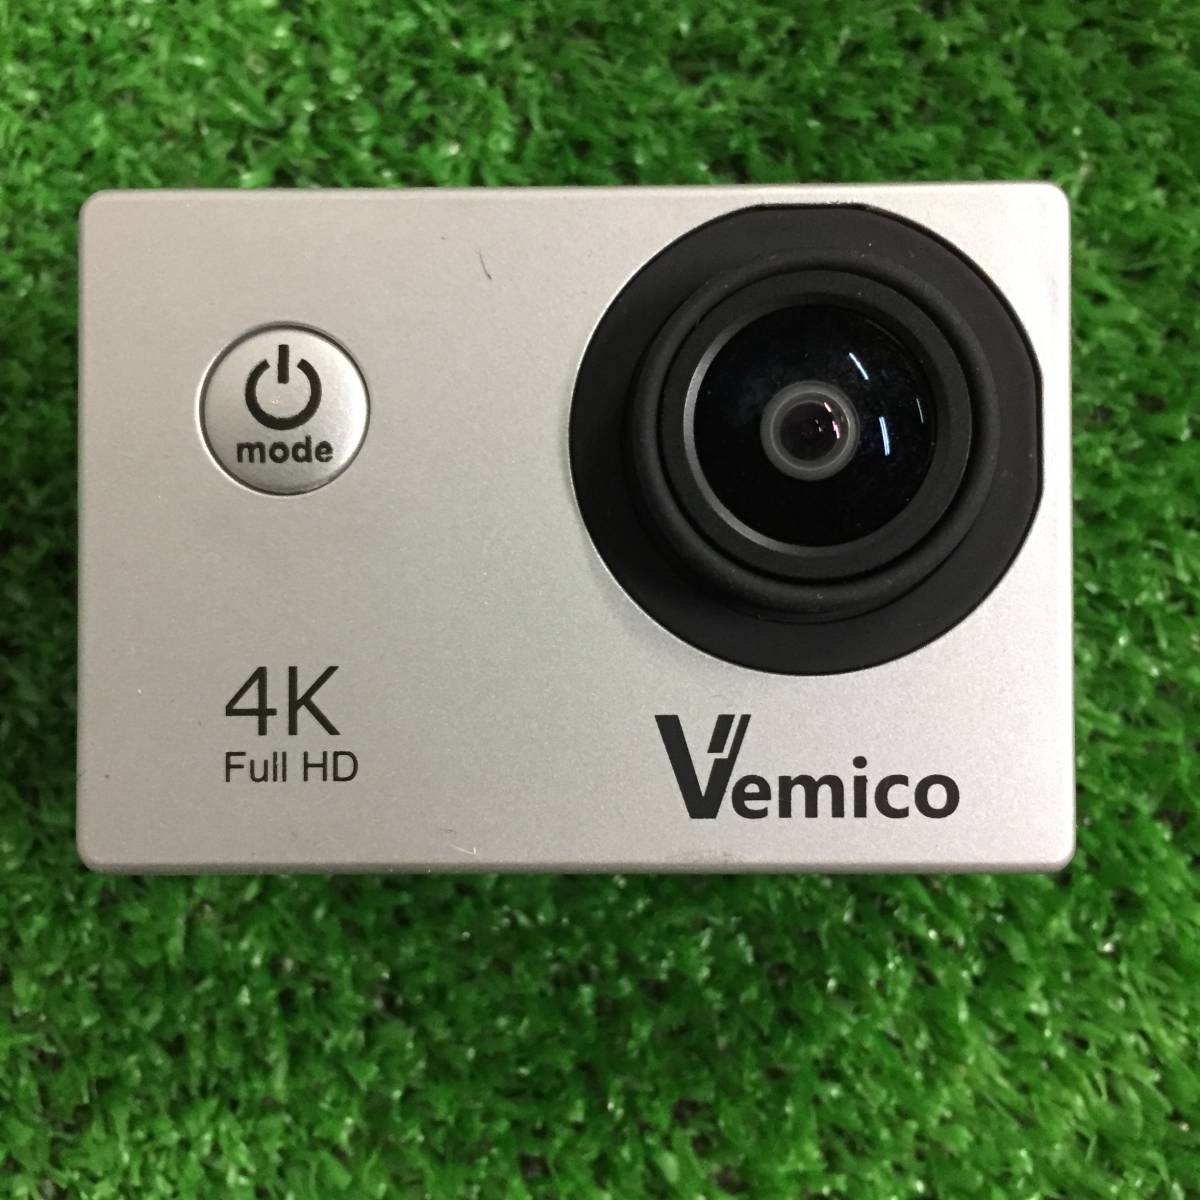 what-size-sd-card-does-the-vemico-4k-action-camera-support